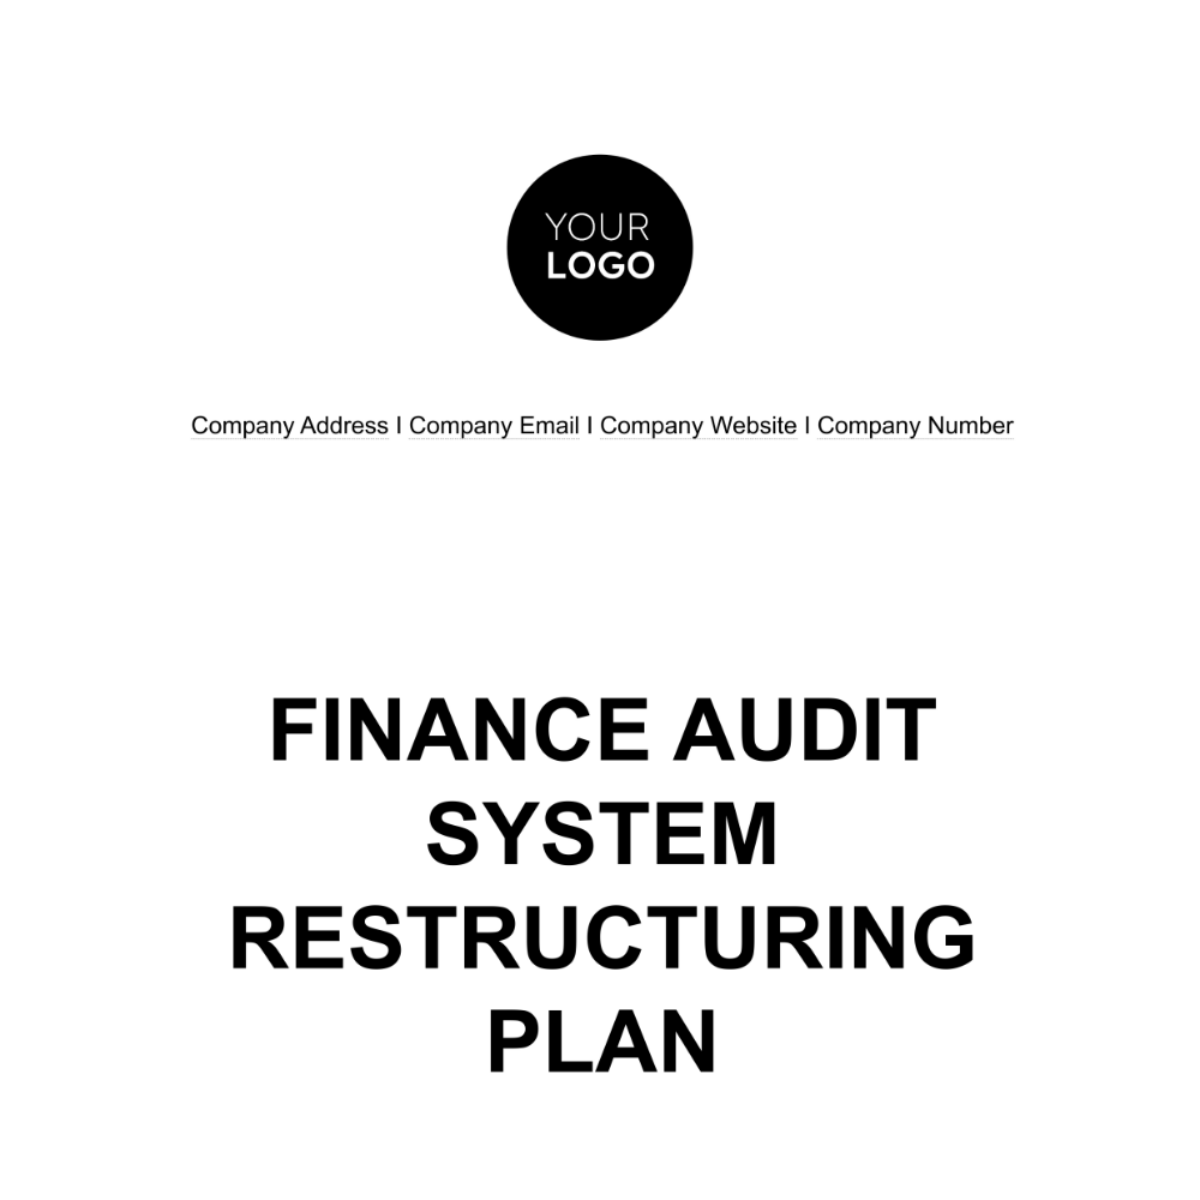 Finance Audit System Restructuring Plan Template